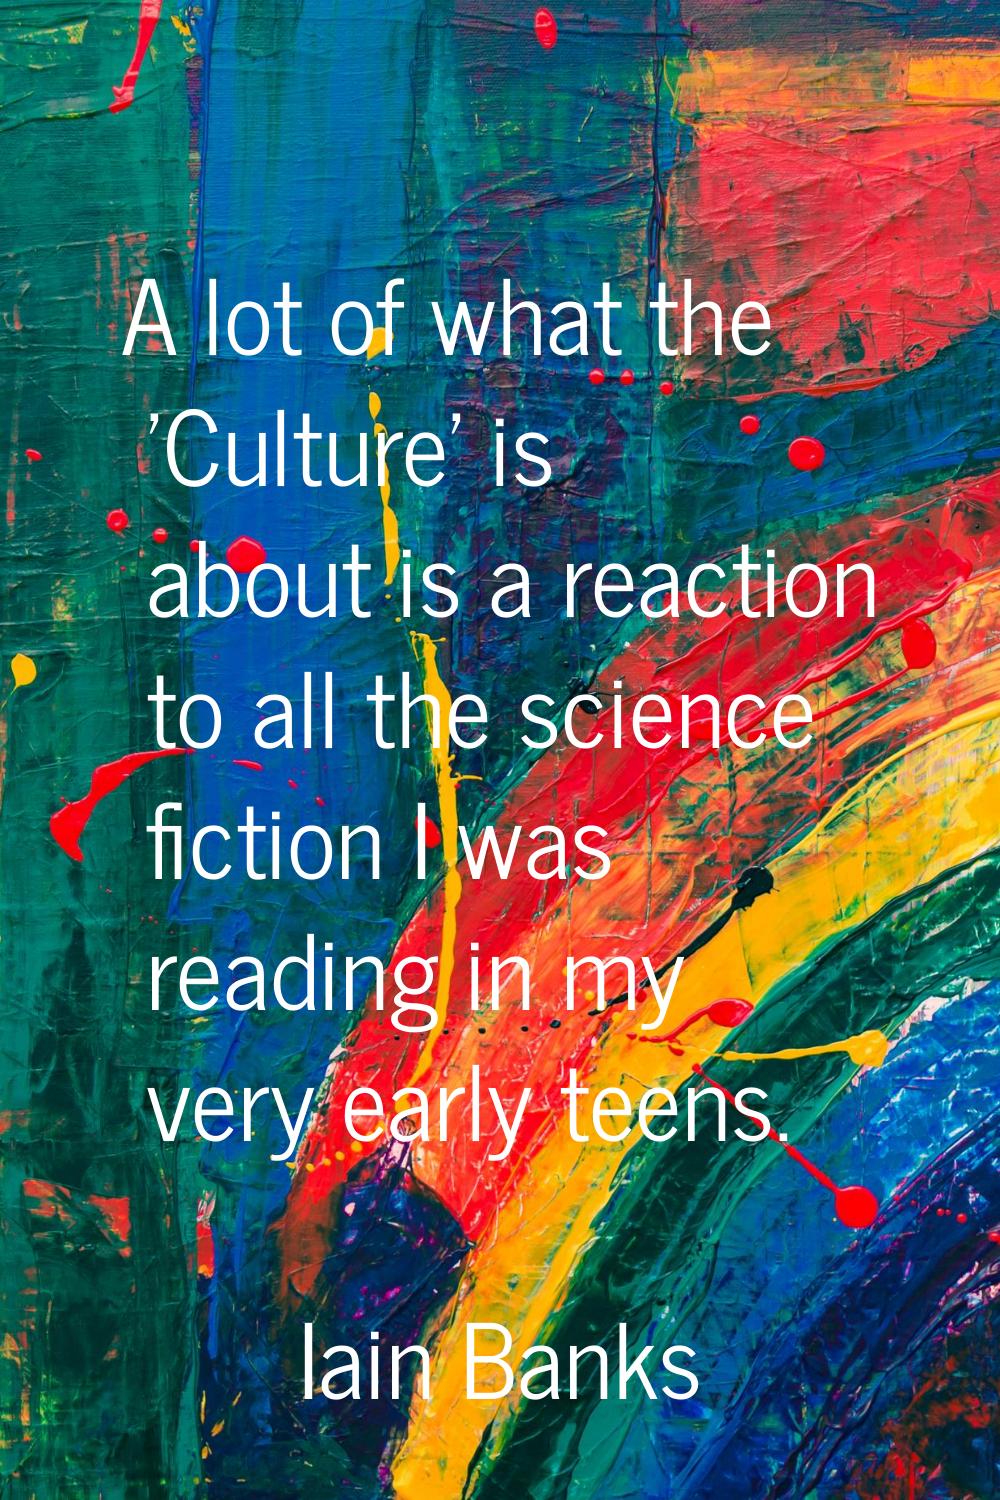 A lot of what the 'Culture' is about is a reaction to all the science fiction I was reading in my v